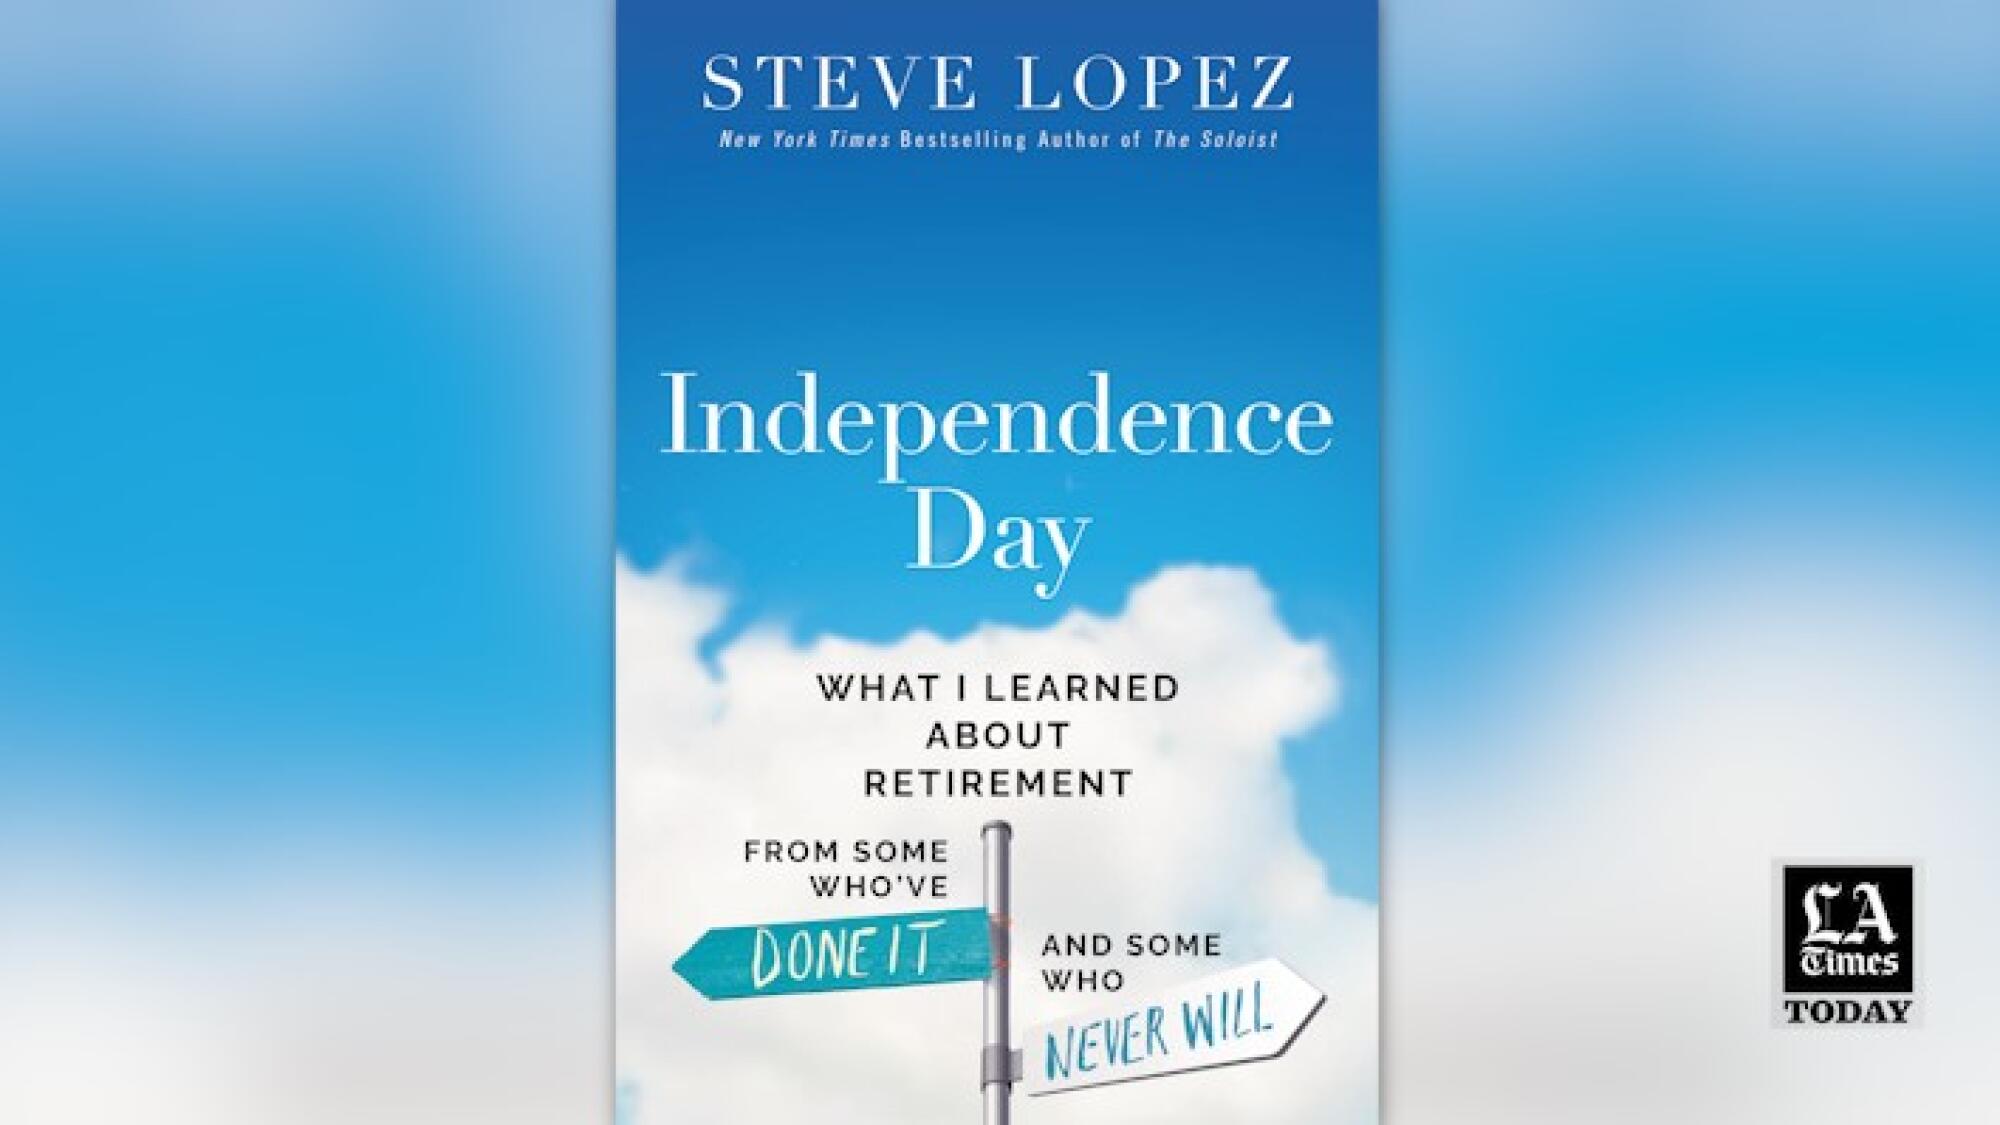 Independence Day: What I Learned About Retirement from Some Who’ve Done It  and Some Who Never Will